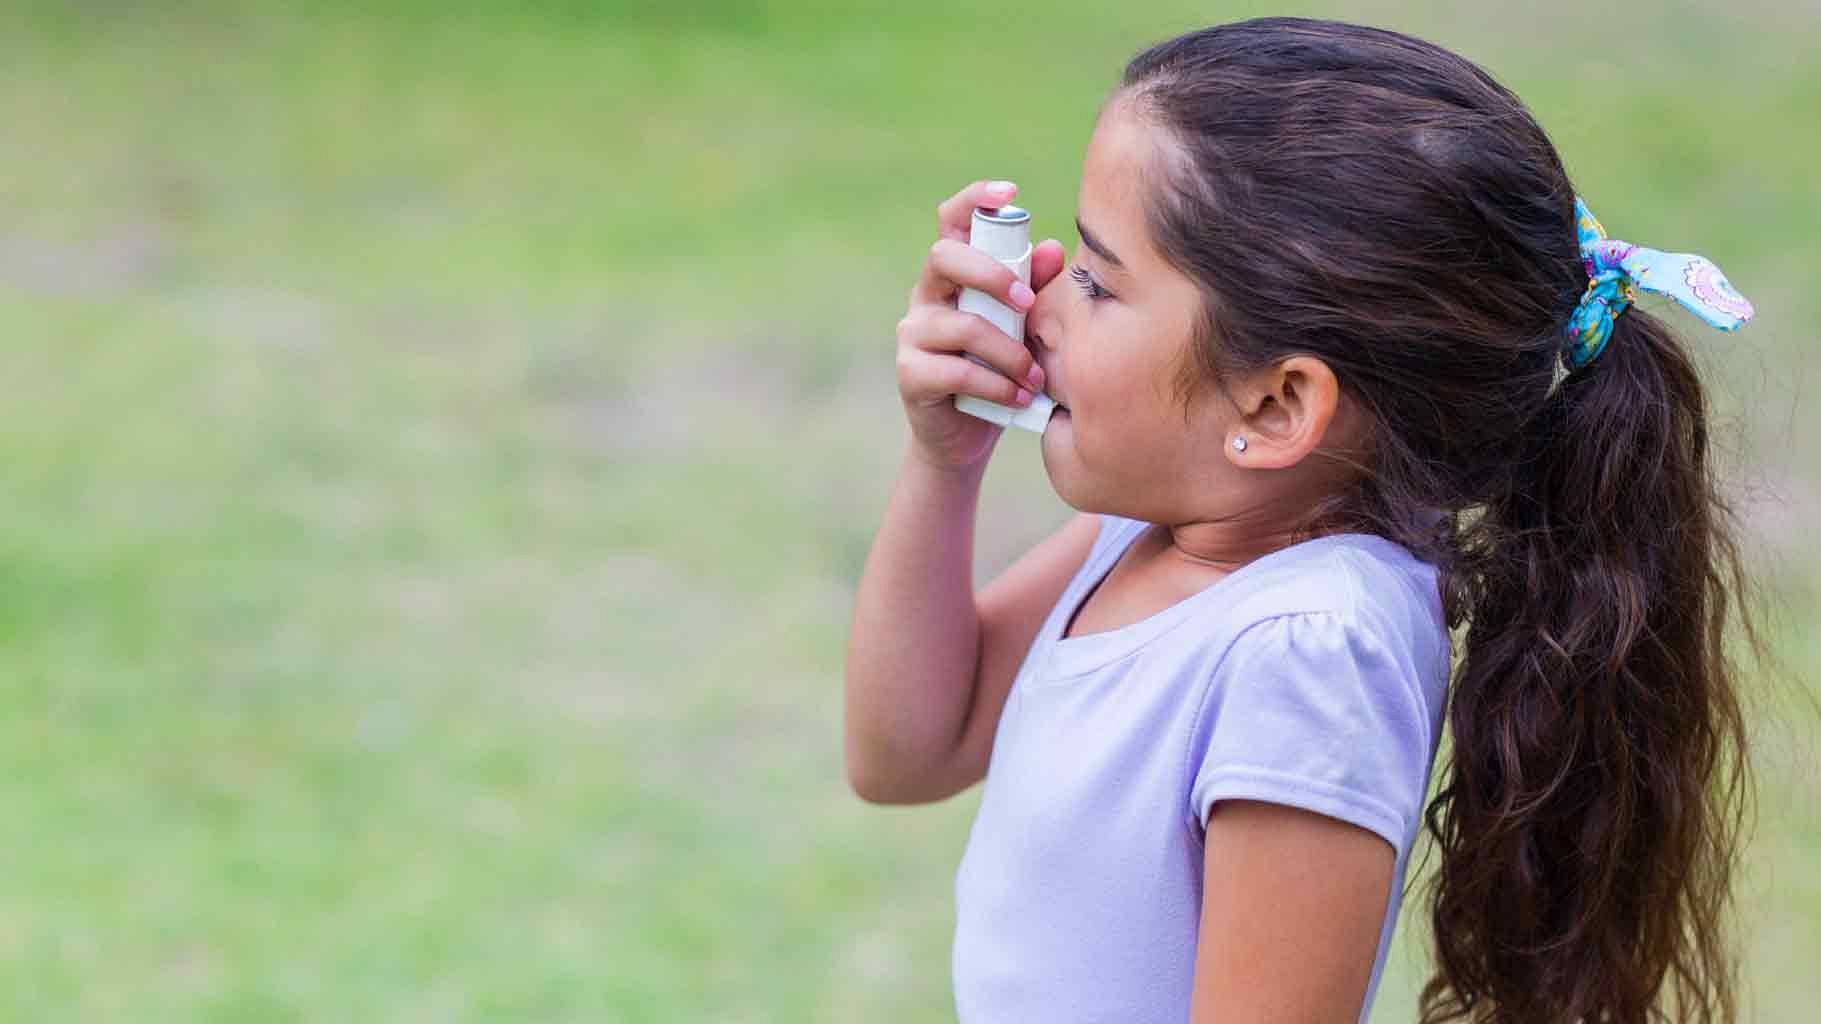 With 300 million cases of asthma across the world, it’s a call to action.